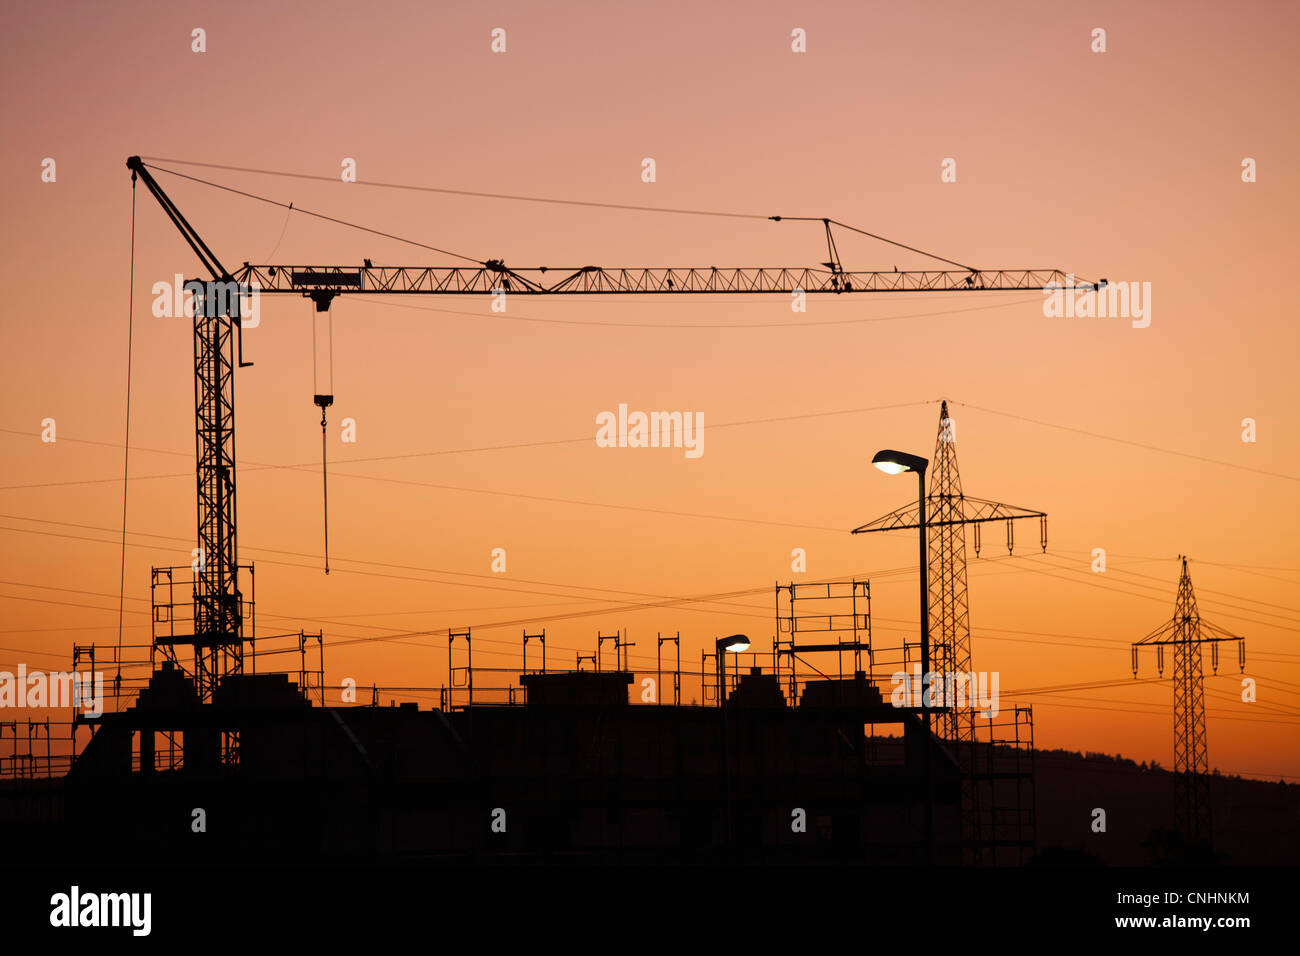 A construction crane and electricity pylons silhouetted against a sunset sky Stock Photo